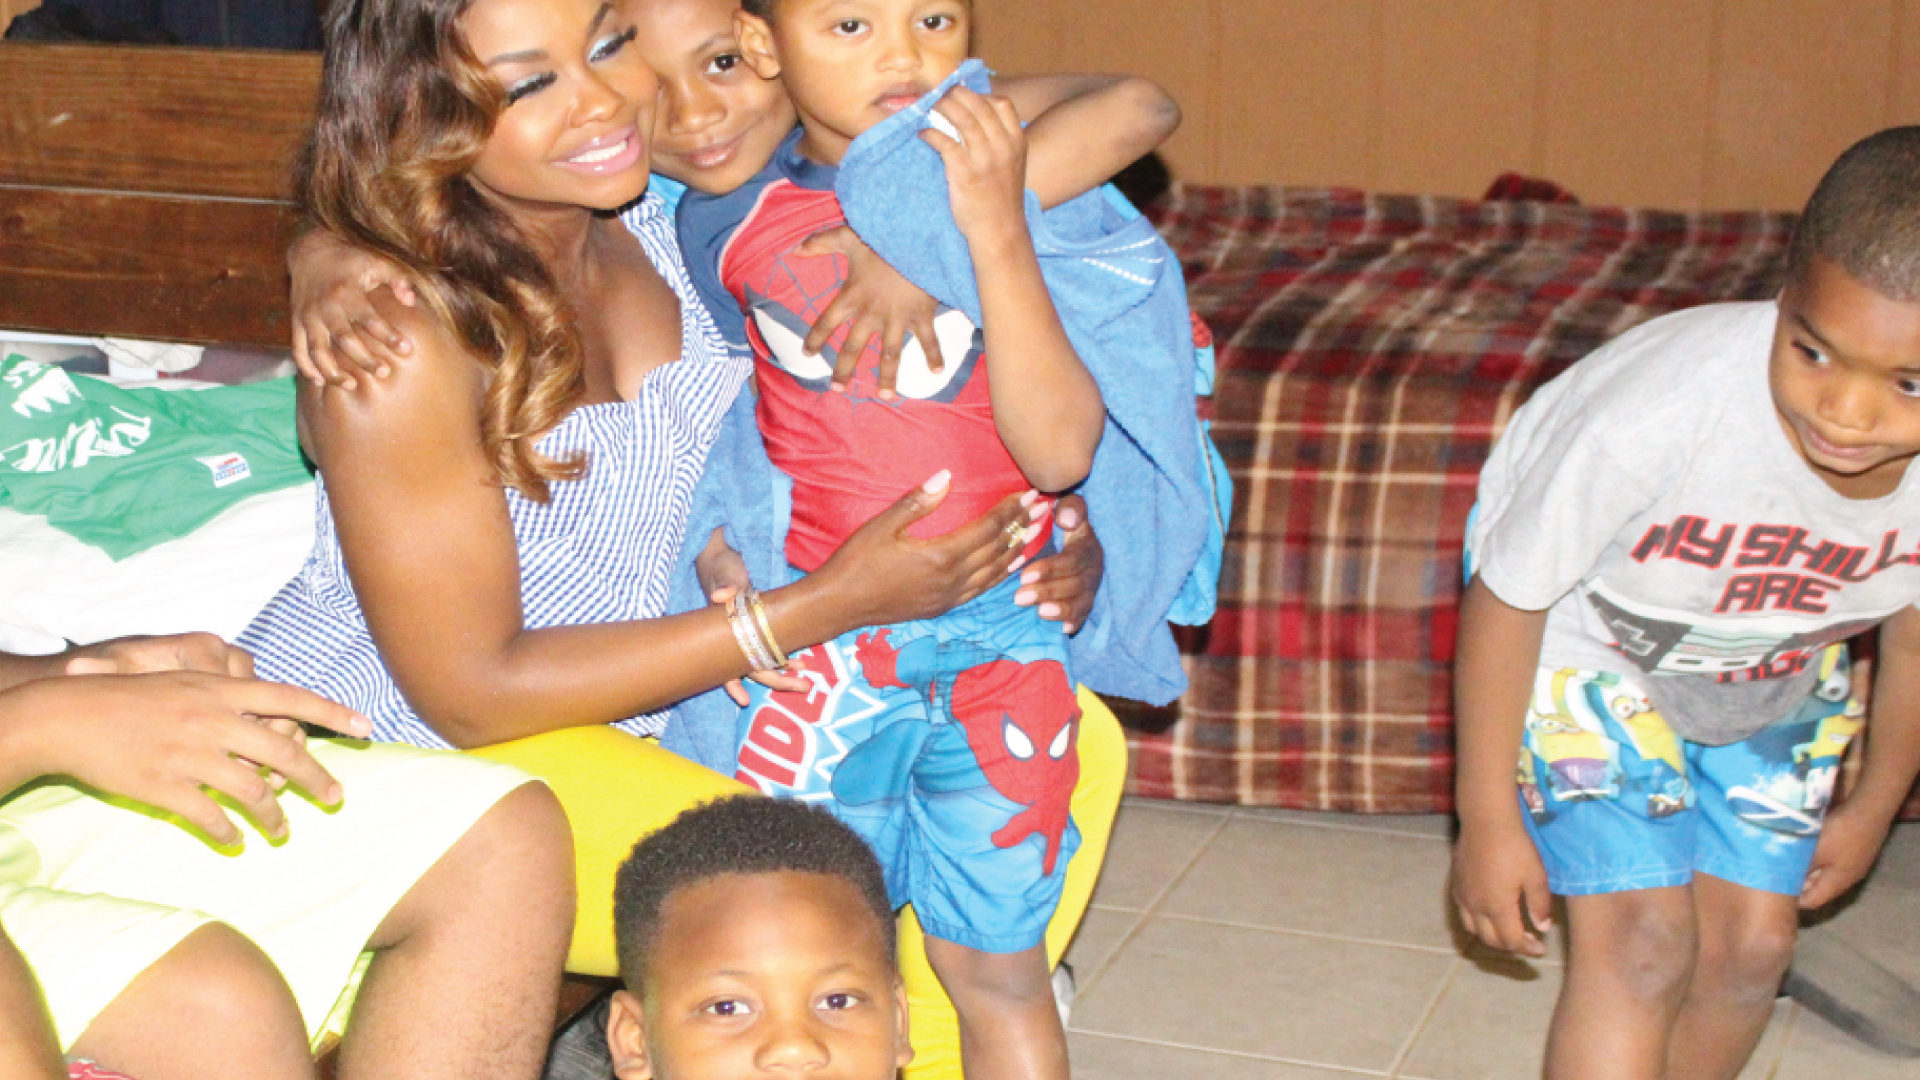 Phaedra Warms the Hearts of Children